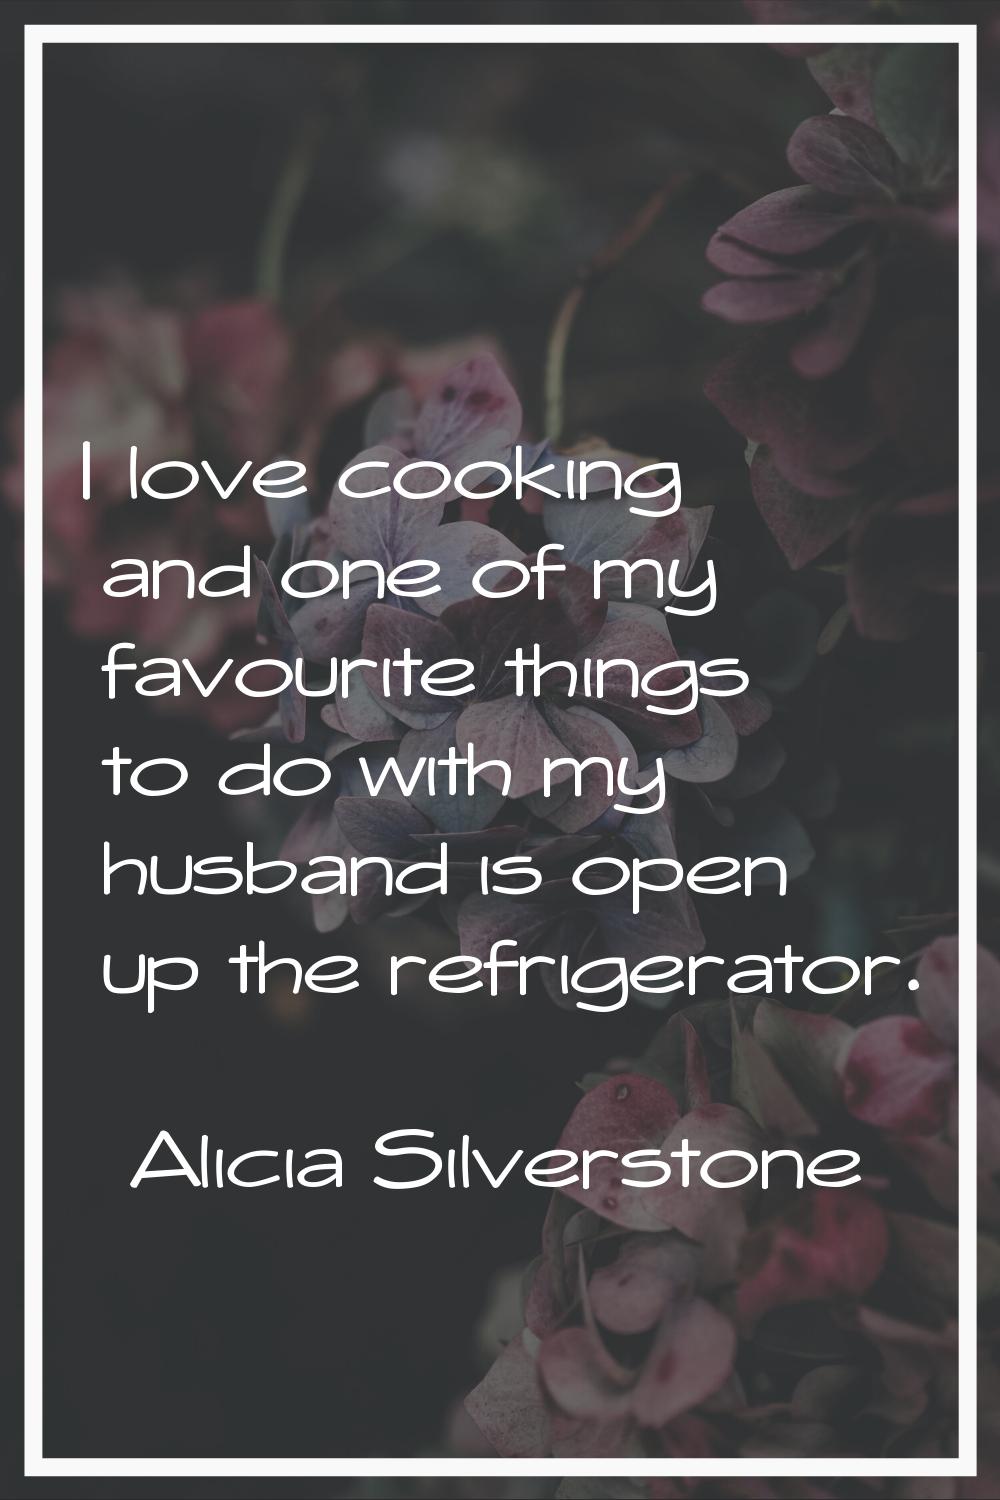 I love cooking and one of my favourite things to do with my husband is open up the refrigerator.